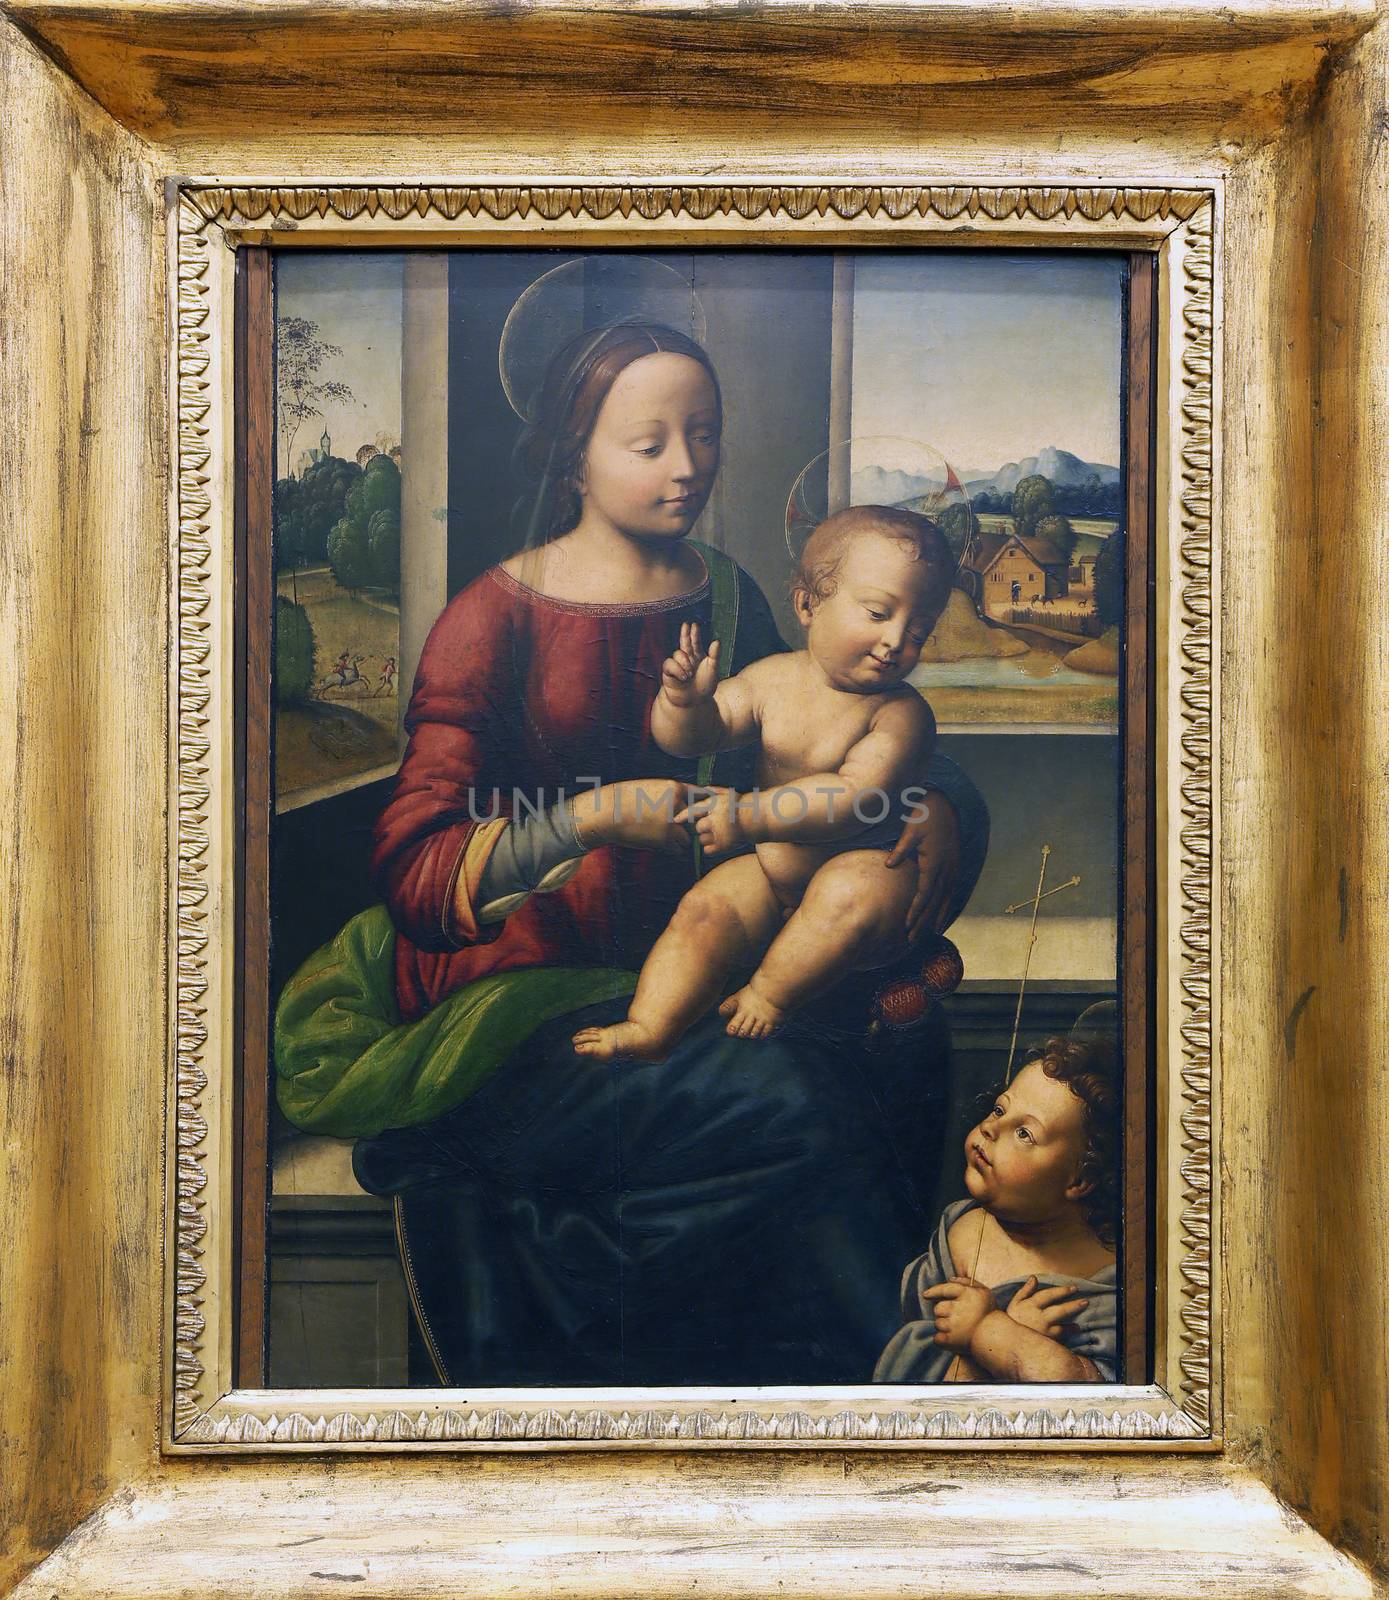 According to Fra Bartolommeo: Madonna and Child with St. John by atlas